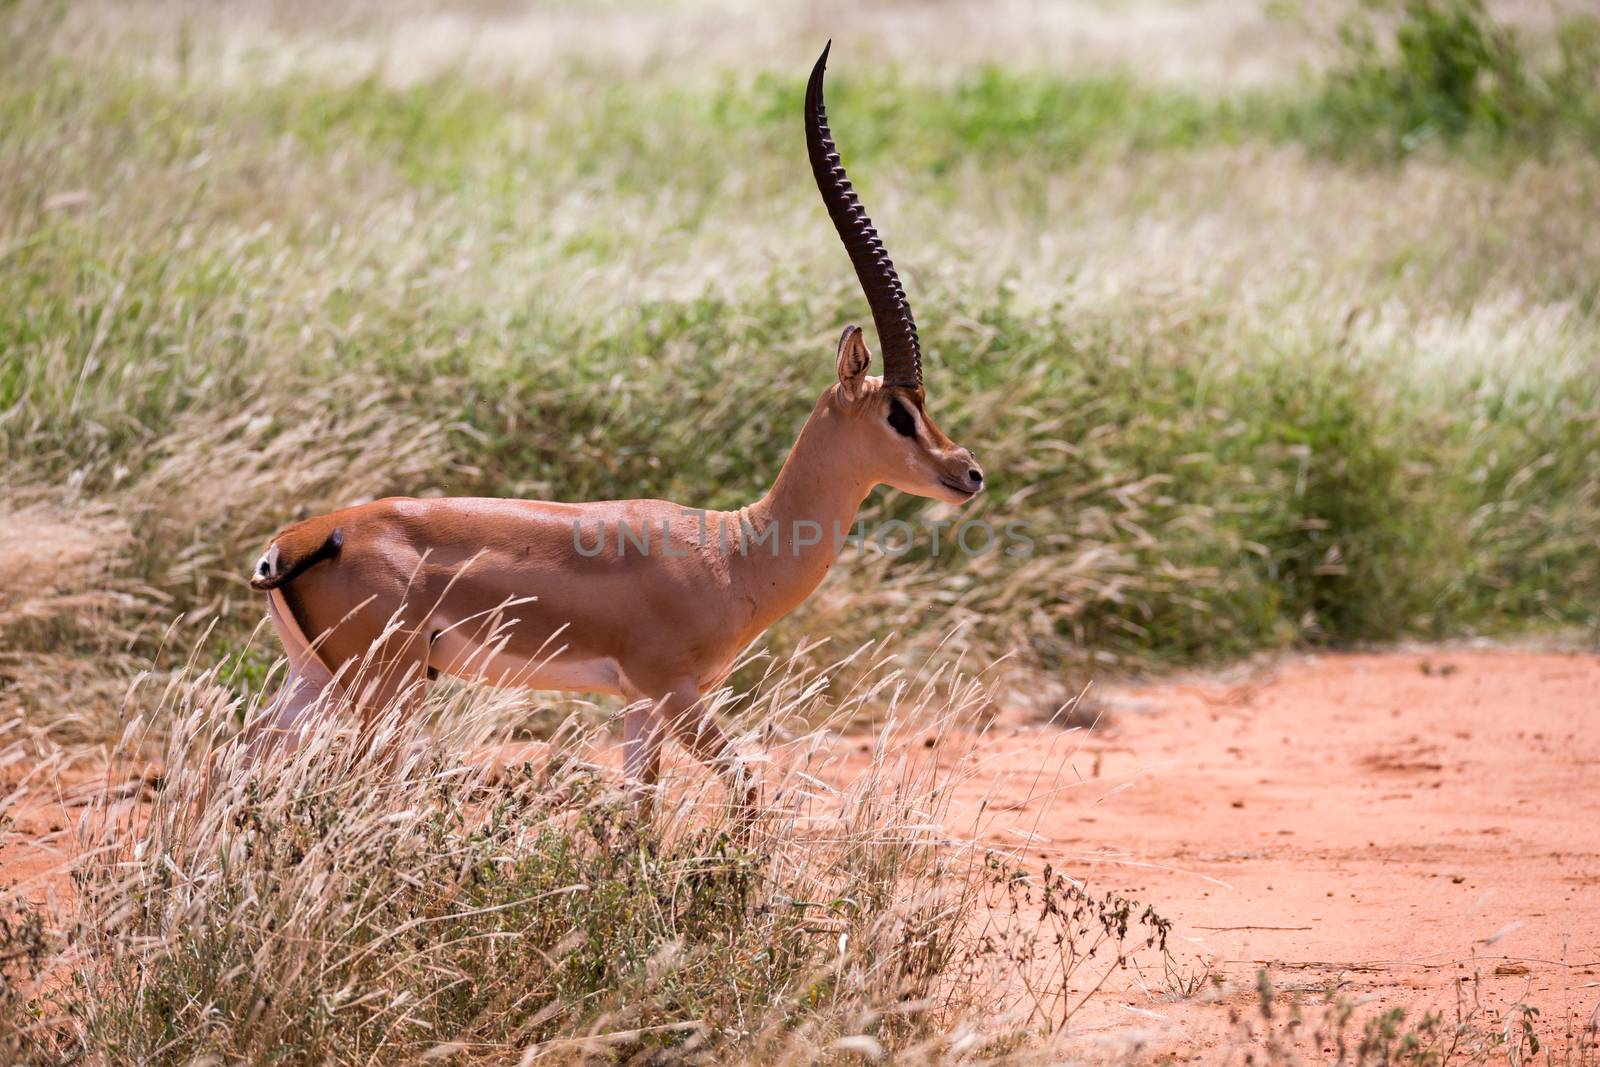 An antelope in the grassland of the savannah in Kenya by 25ehaag6